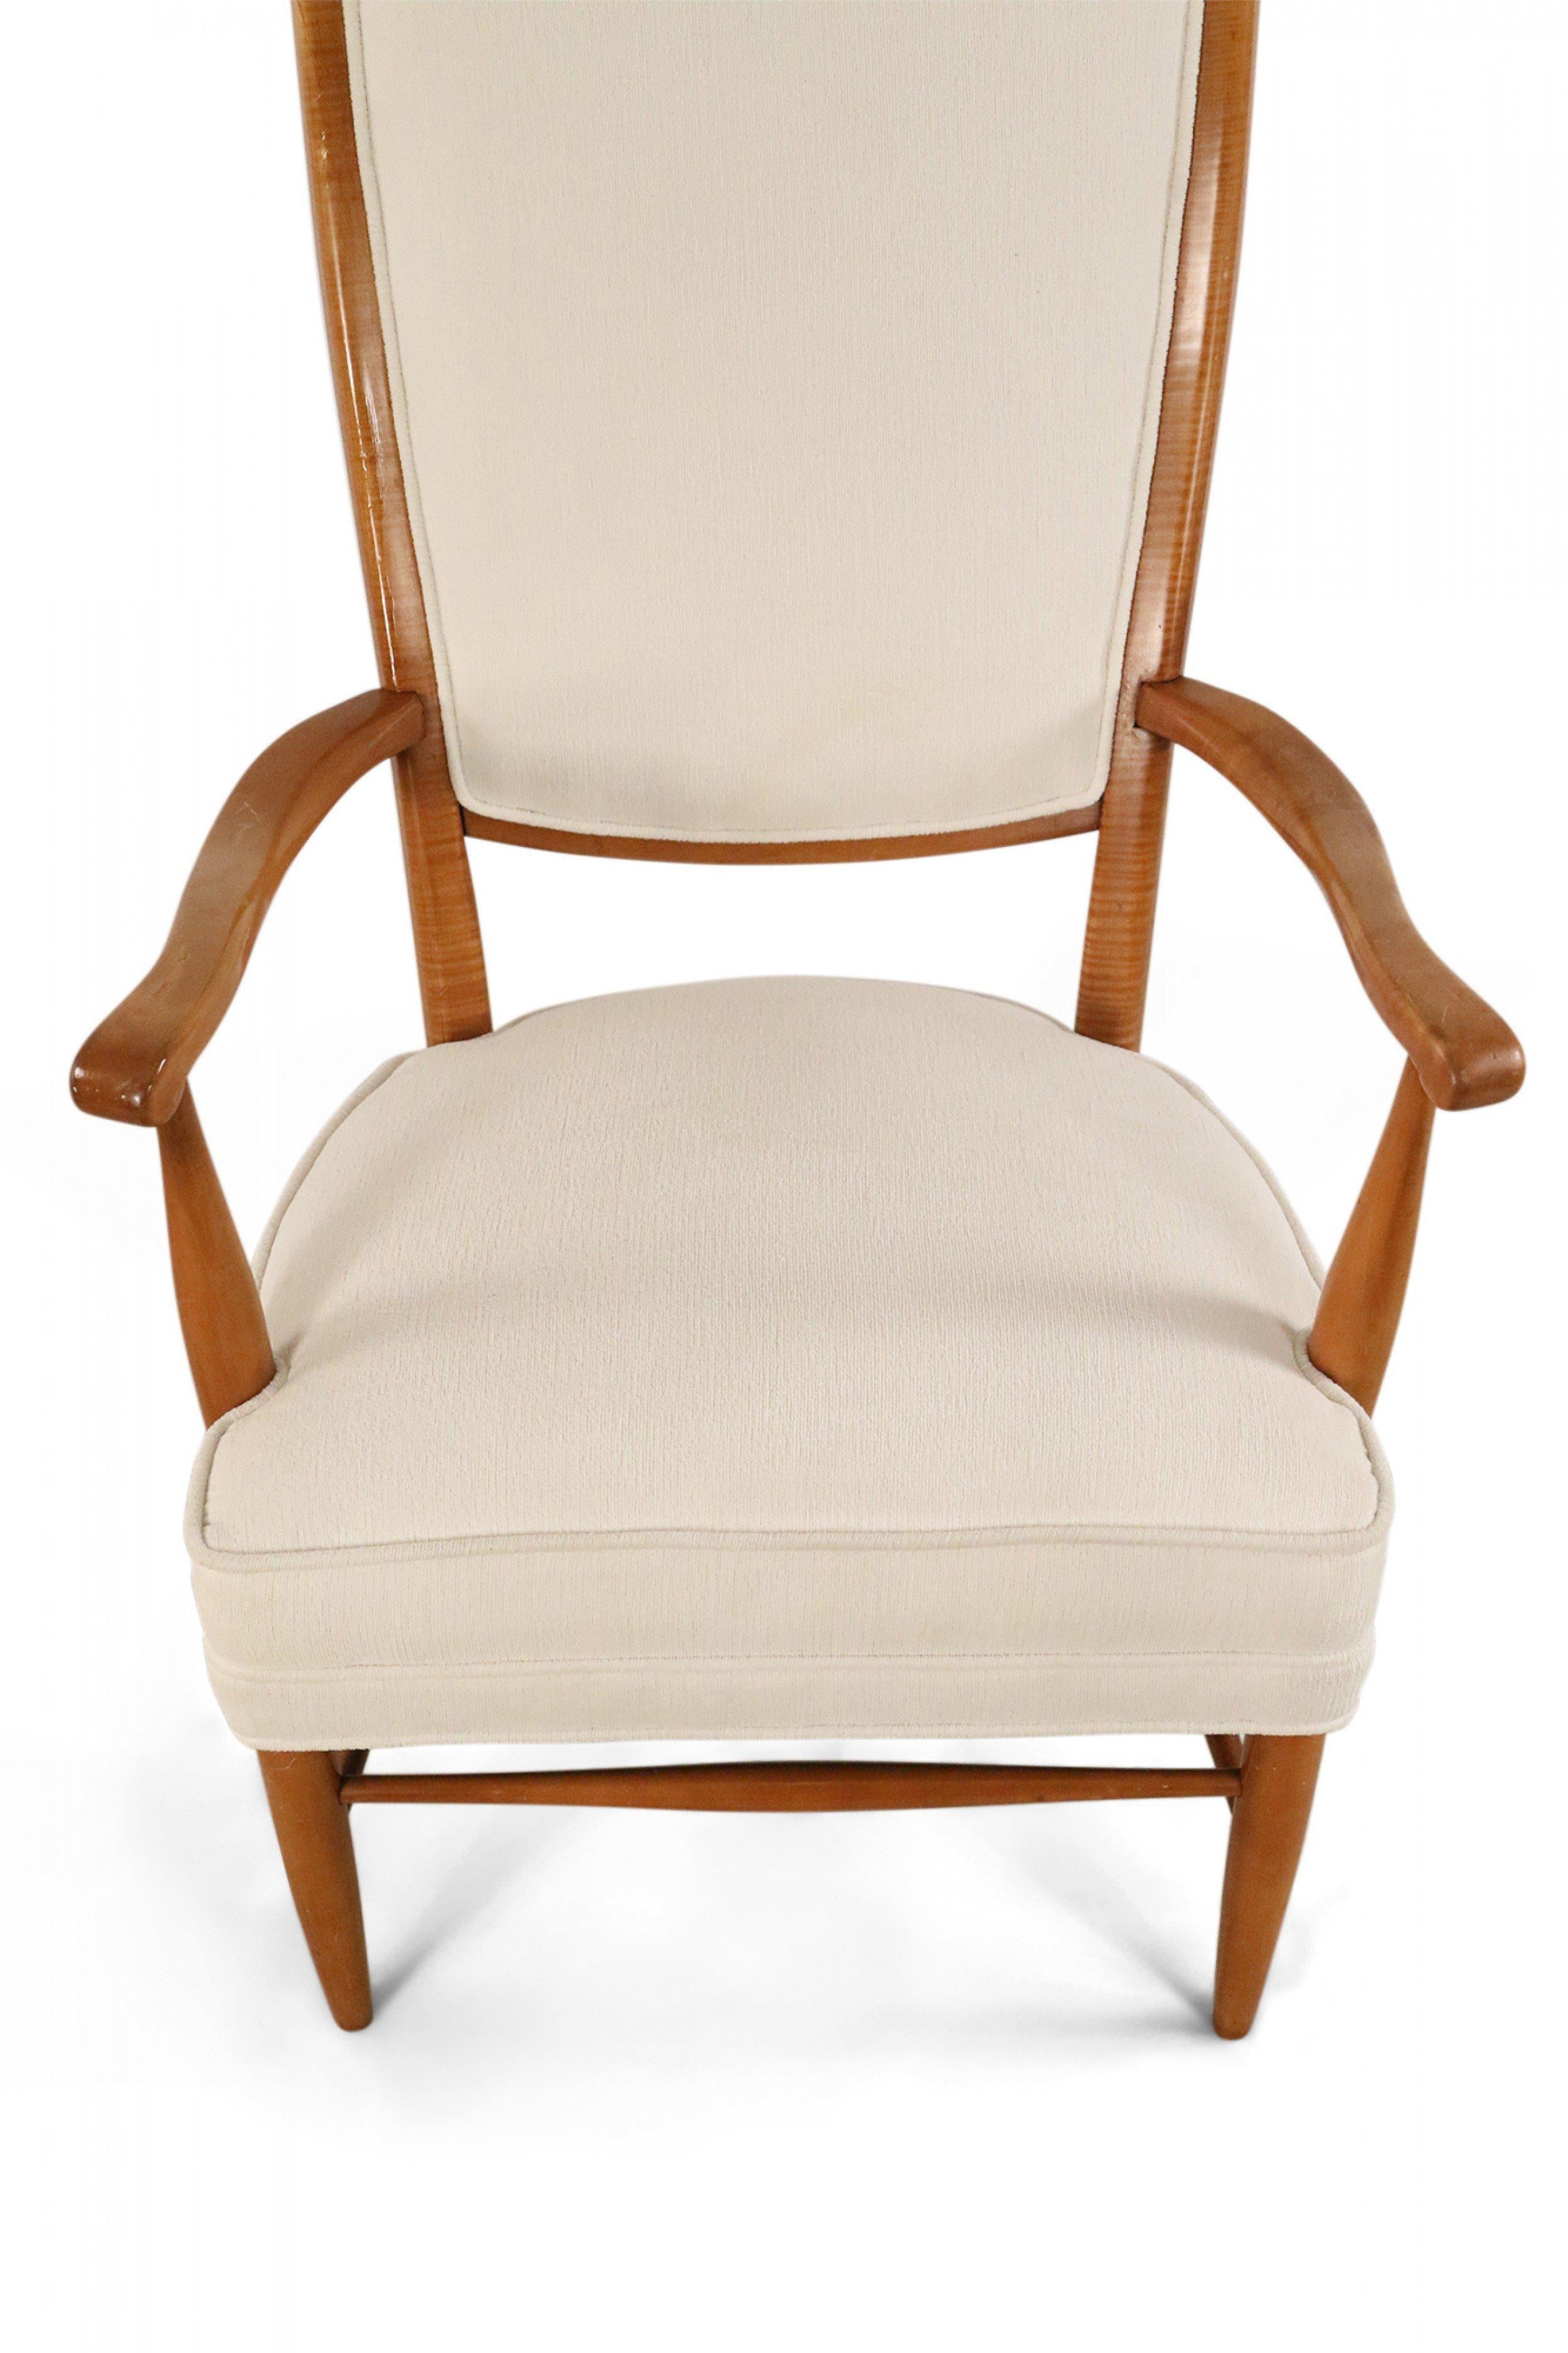 Edward Wormley Style Midcentury High Back Beige Upholstered Maple Armchair For Sale 4